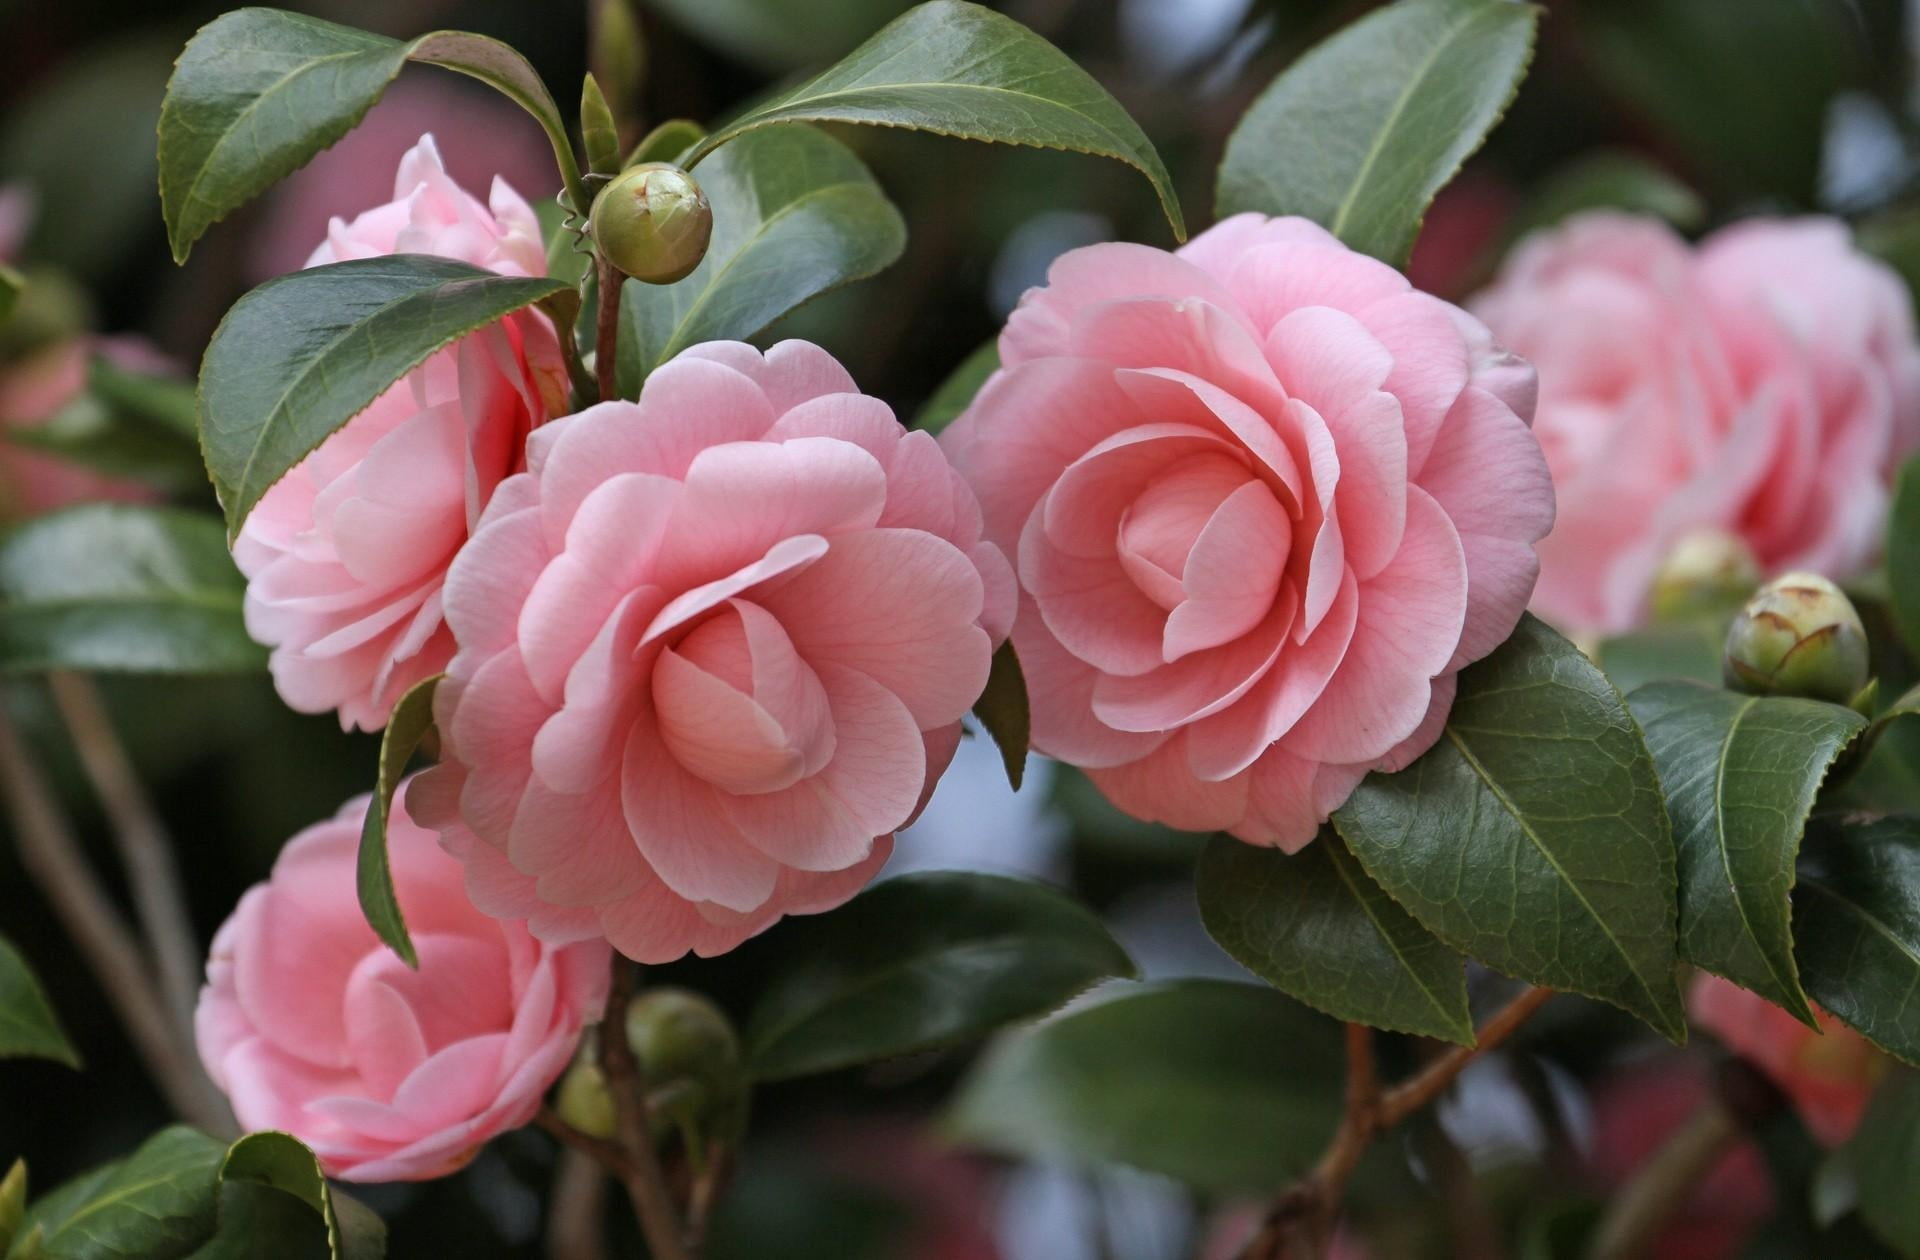 pink camellia flowers, garden, buds, stems, leaves, close-up